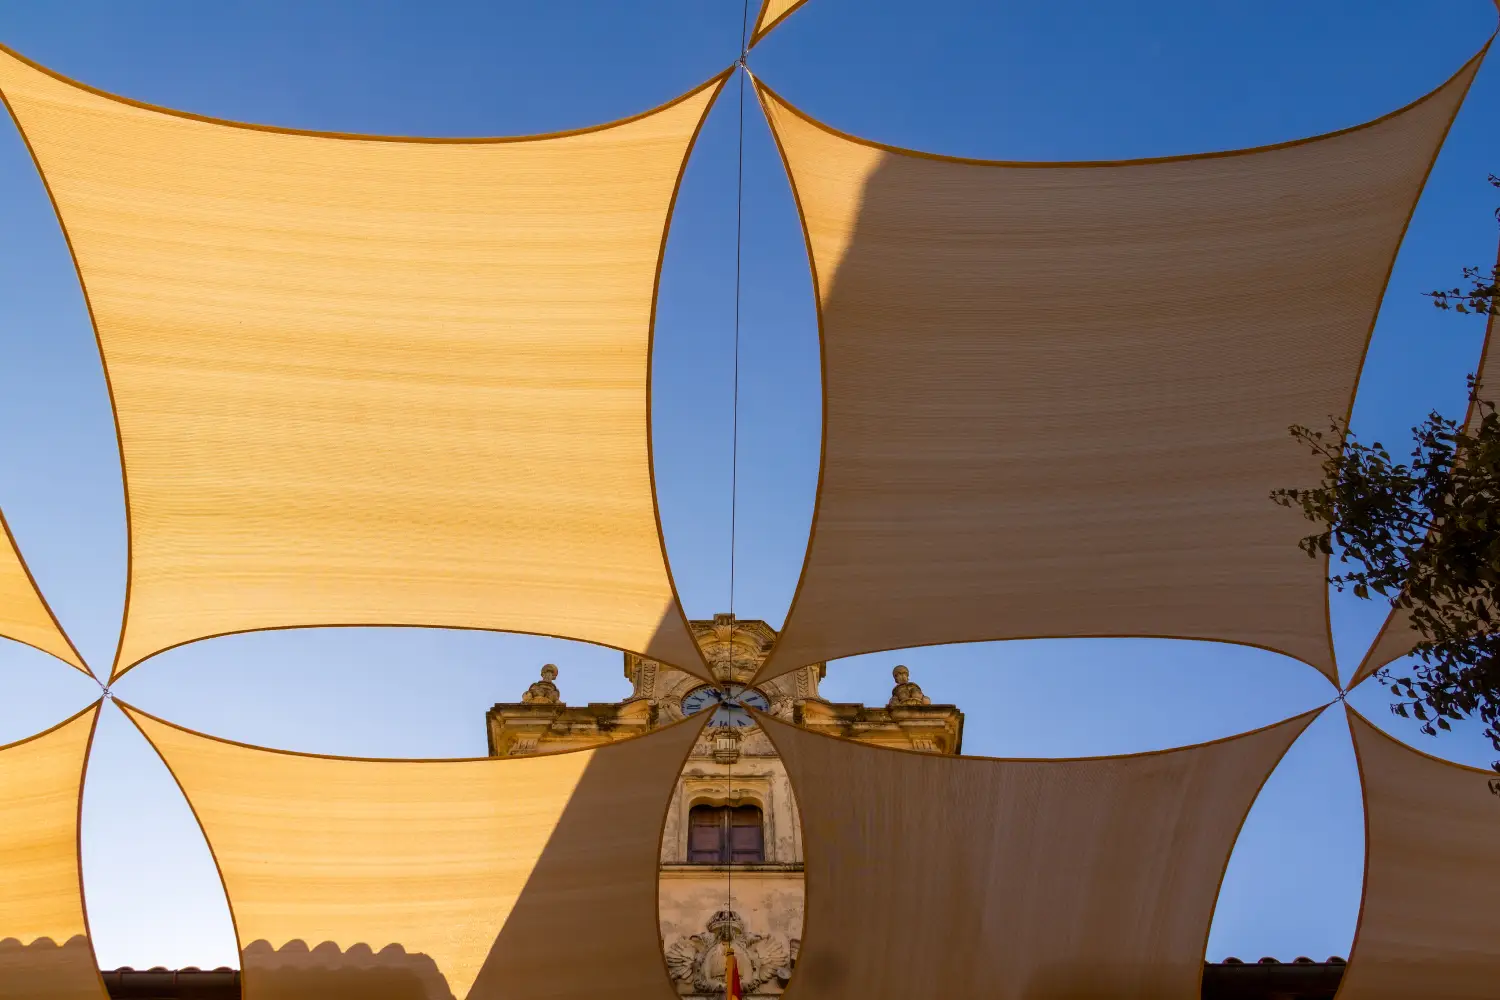 Ferry to Alcudia - Looking through sail shaped sunshades at the Ayuntamiento clock tower, old town Alcudia, Mallorca, Spain.